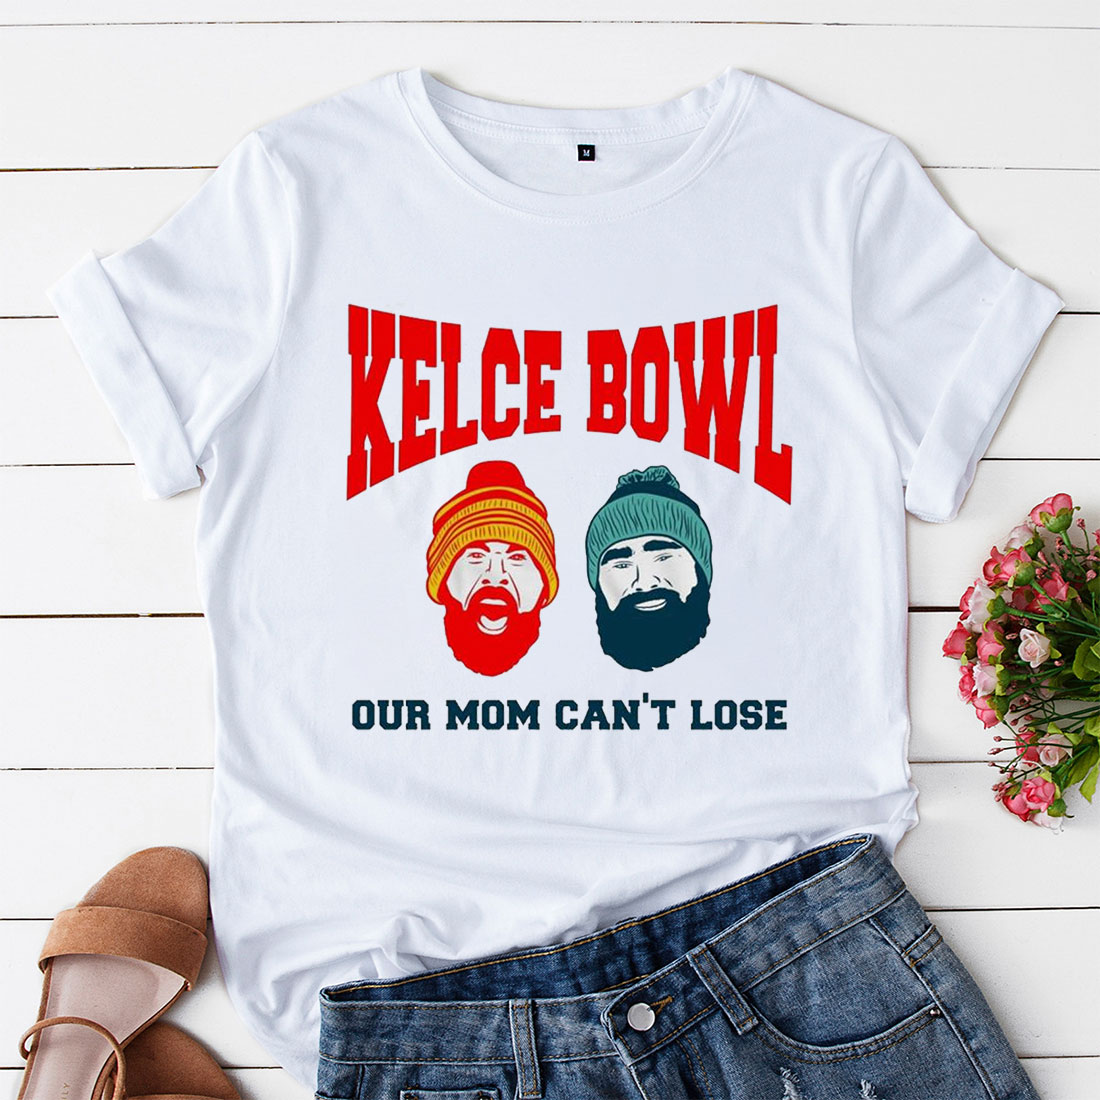 brother vs. brother: kelces prepare for super bowl showdown